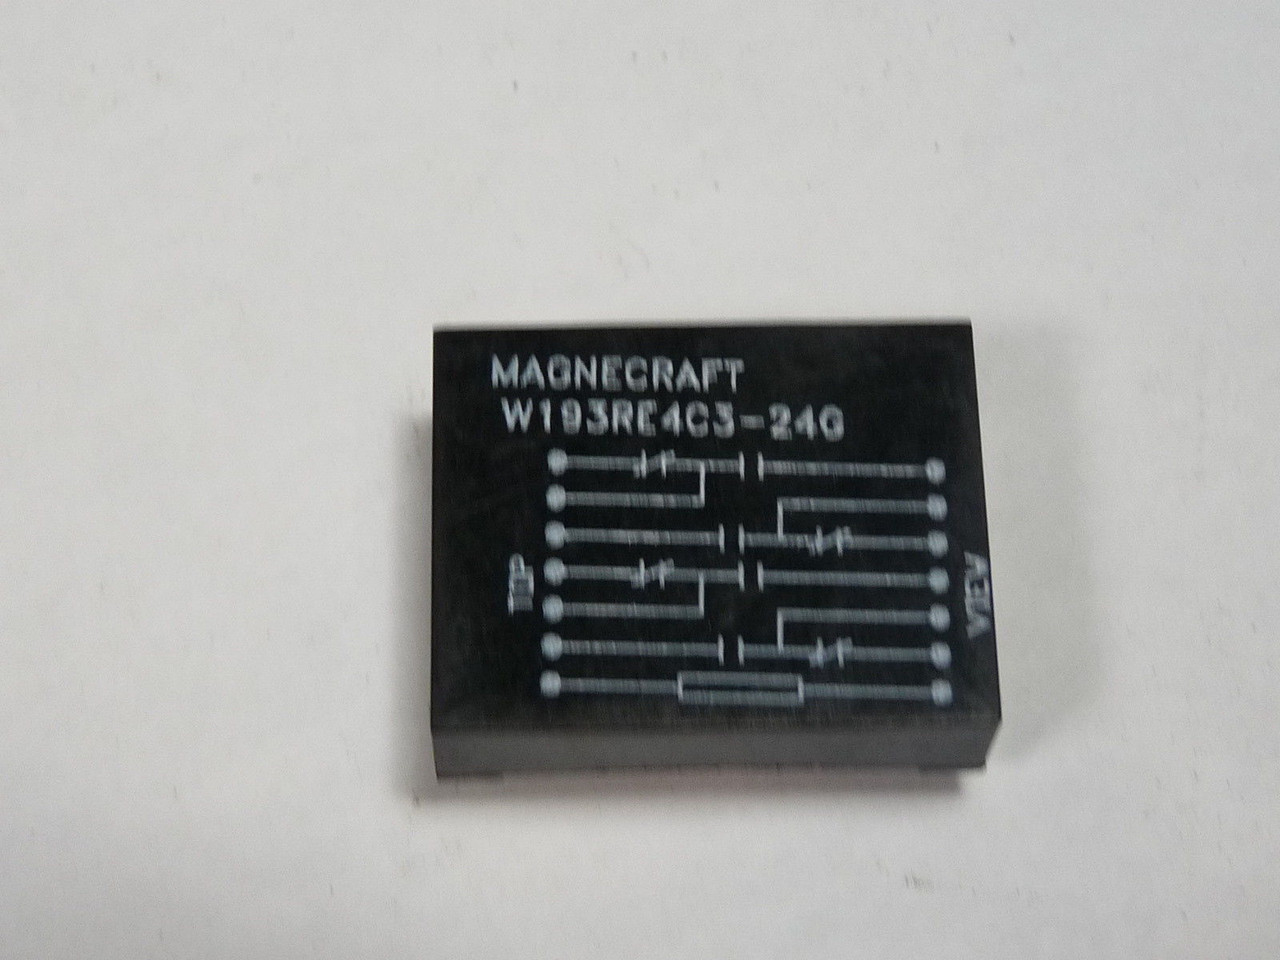 Struthers-Dunn W193RE4C3-24G Magnecraft Relay USED